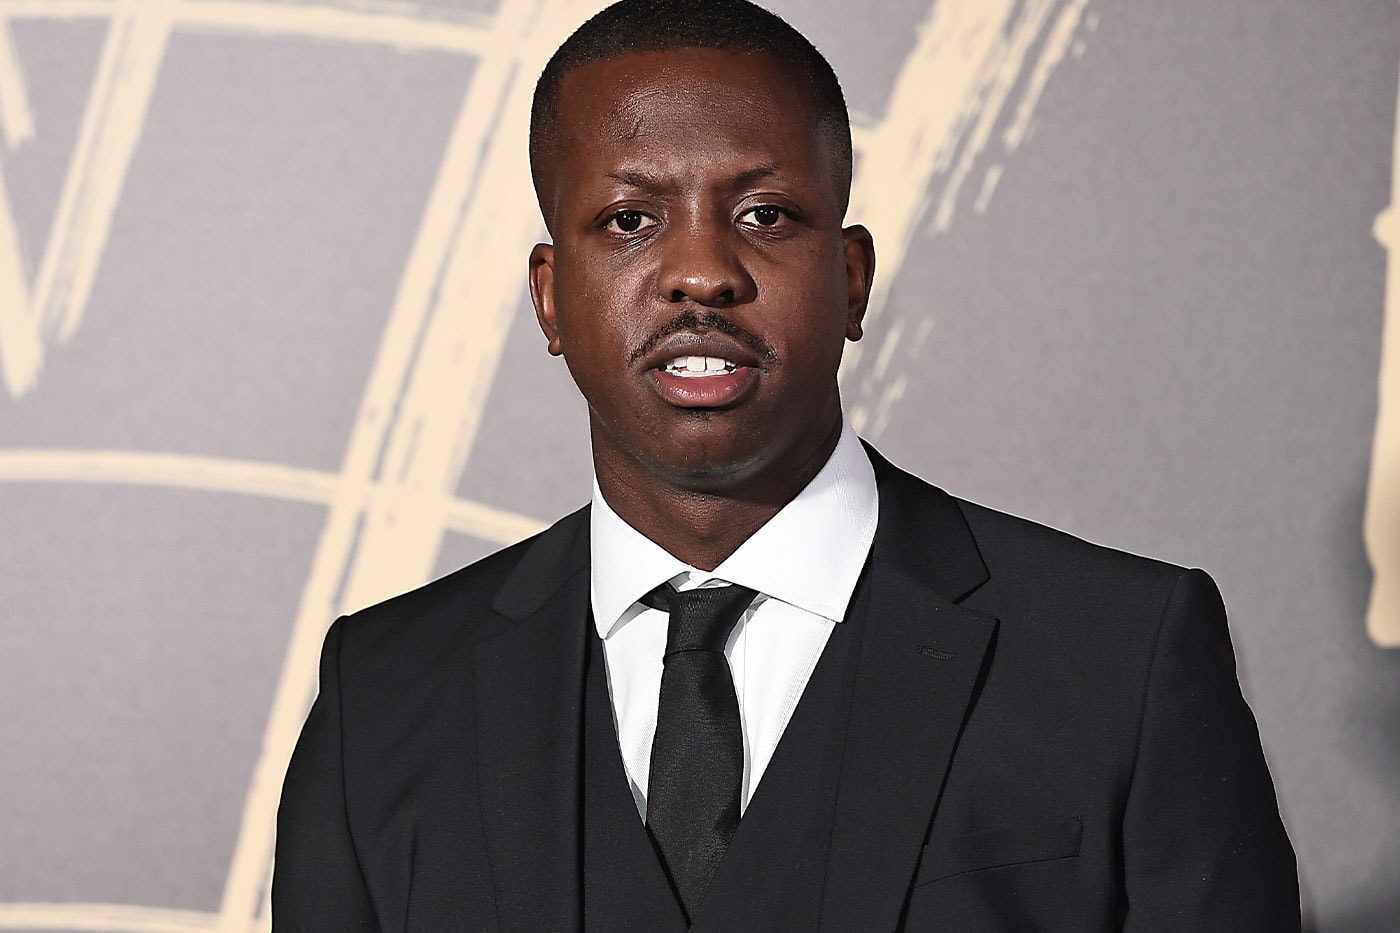 SBTV Founder Jamal Edwards Dead 31 Years Old dave stormzy ed sheeran wiley 